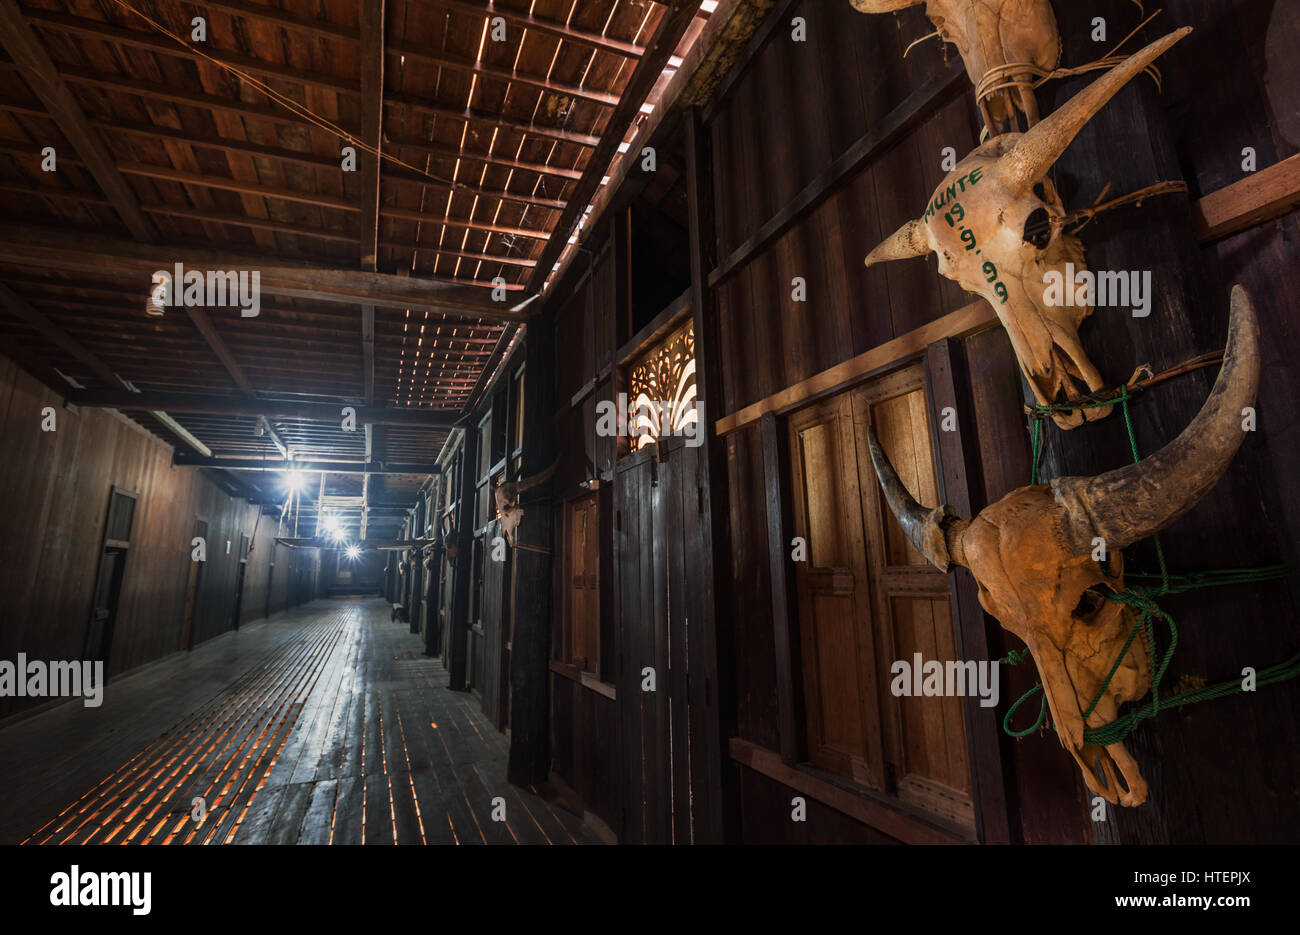 Authentic Dayak Longhouse interior made entirely of Bornean Ironwood in Kalimantan, Indonesia Stock Photo